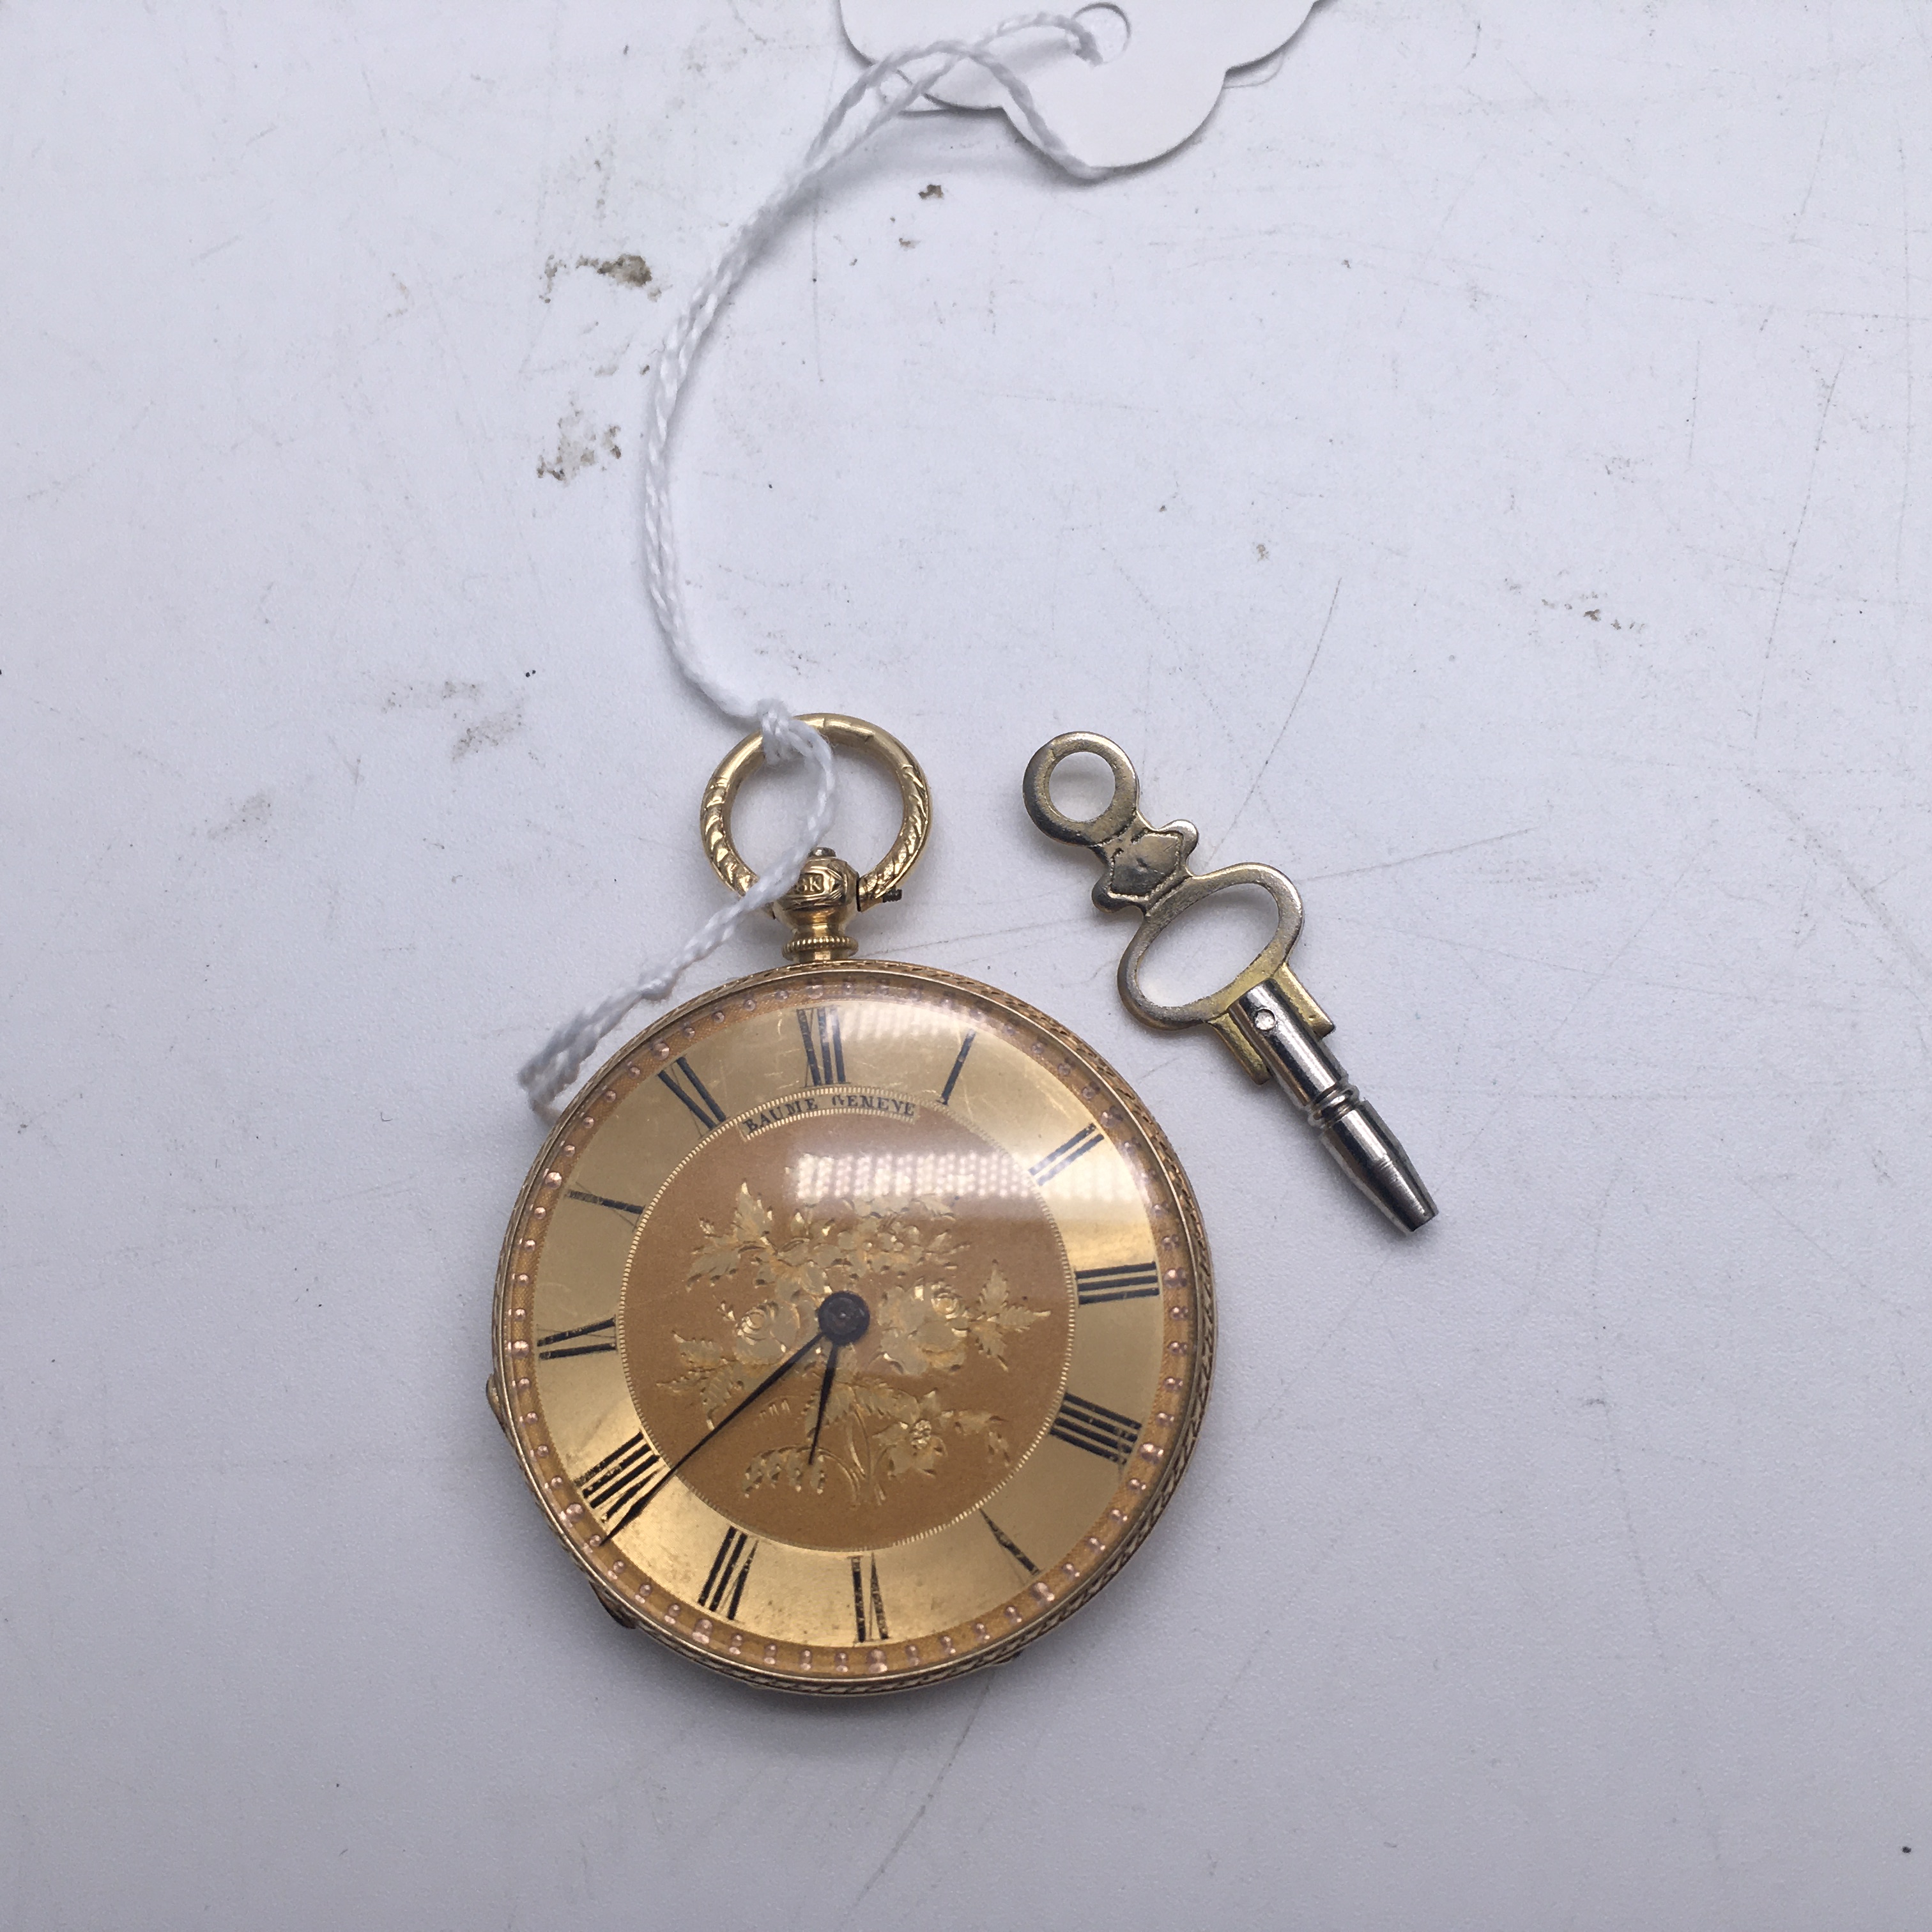 Baume Geneva pocket watch in 18 carat gold with mechanical movement the bessel has floral decoration